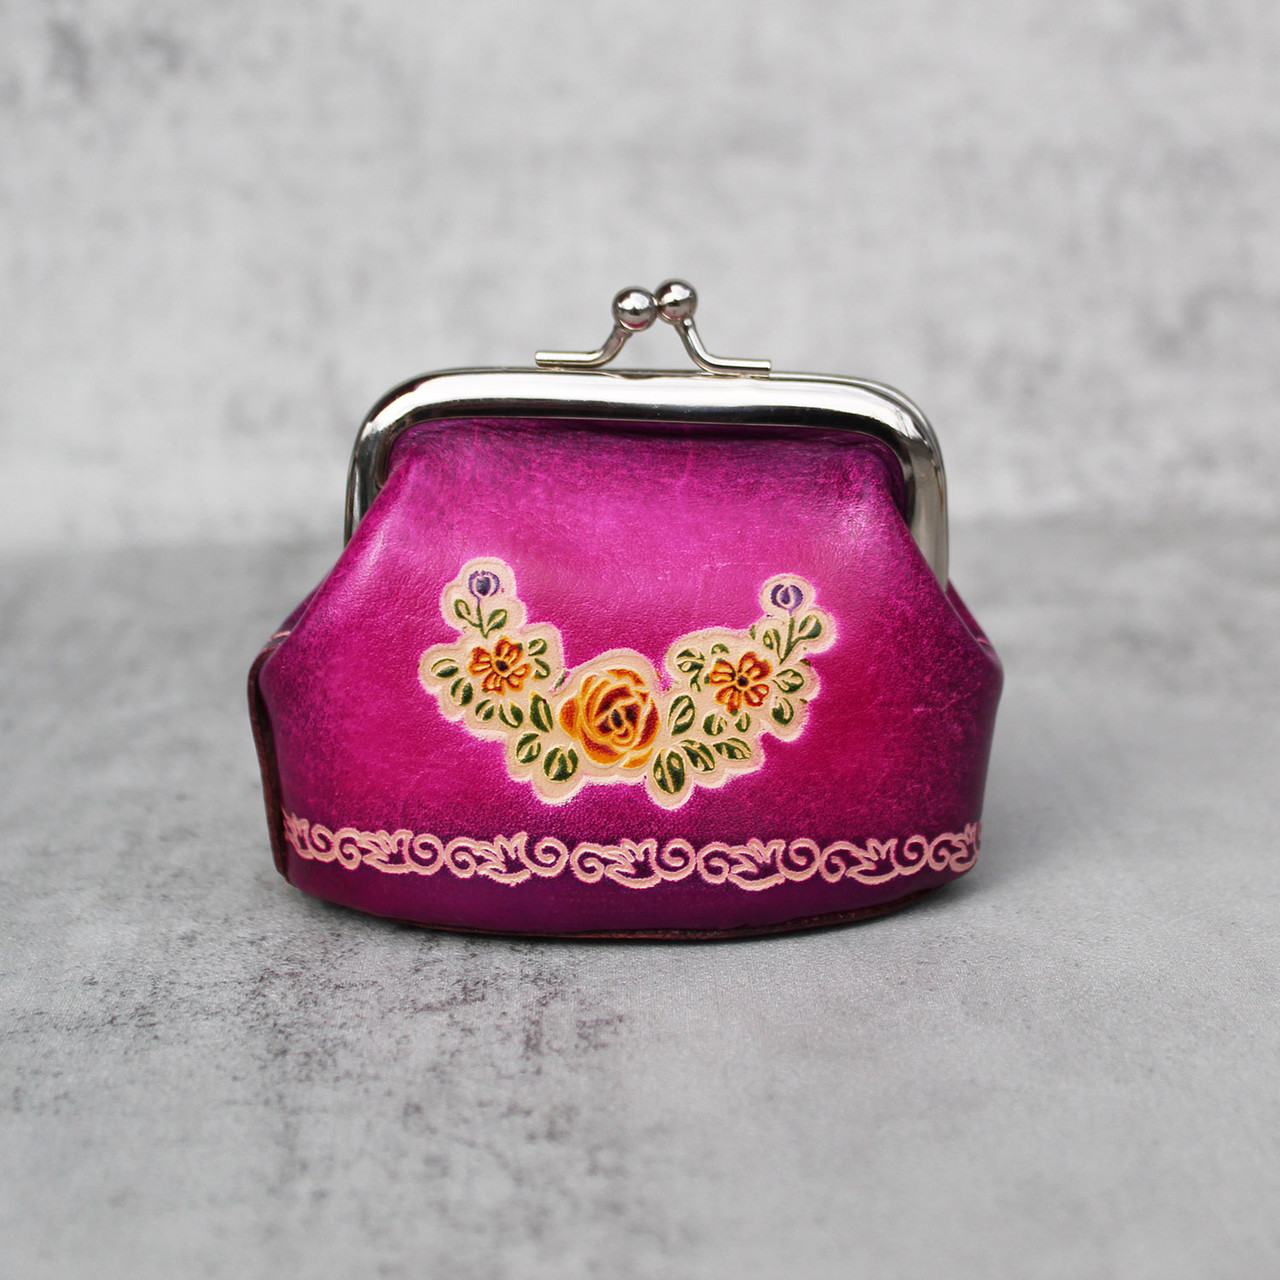 Maydear Embroidery Coin Purse Kits for Beginners, Handmade DIY Embroidered  Clutch with All Supplies, Bamboo Embroidery Hoops, Tools, English  Instruction : Amazon.in: Fashion